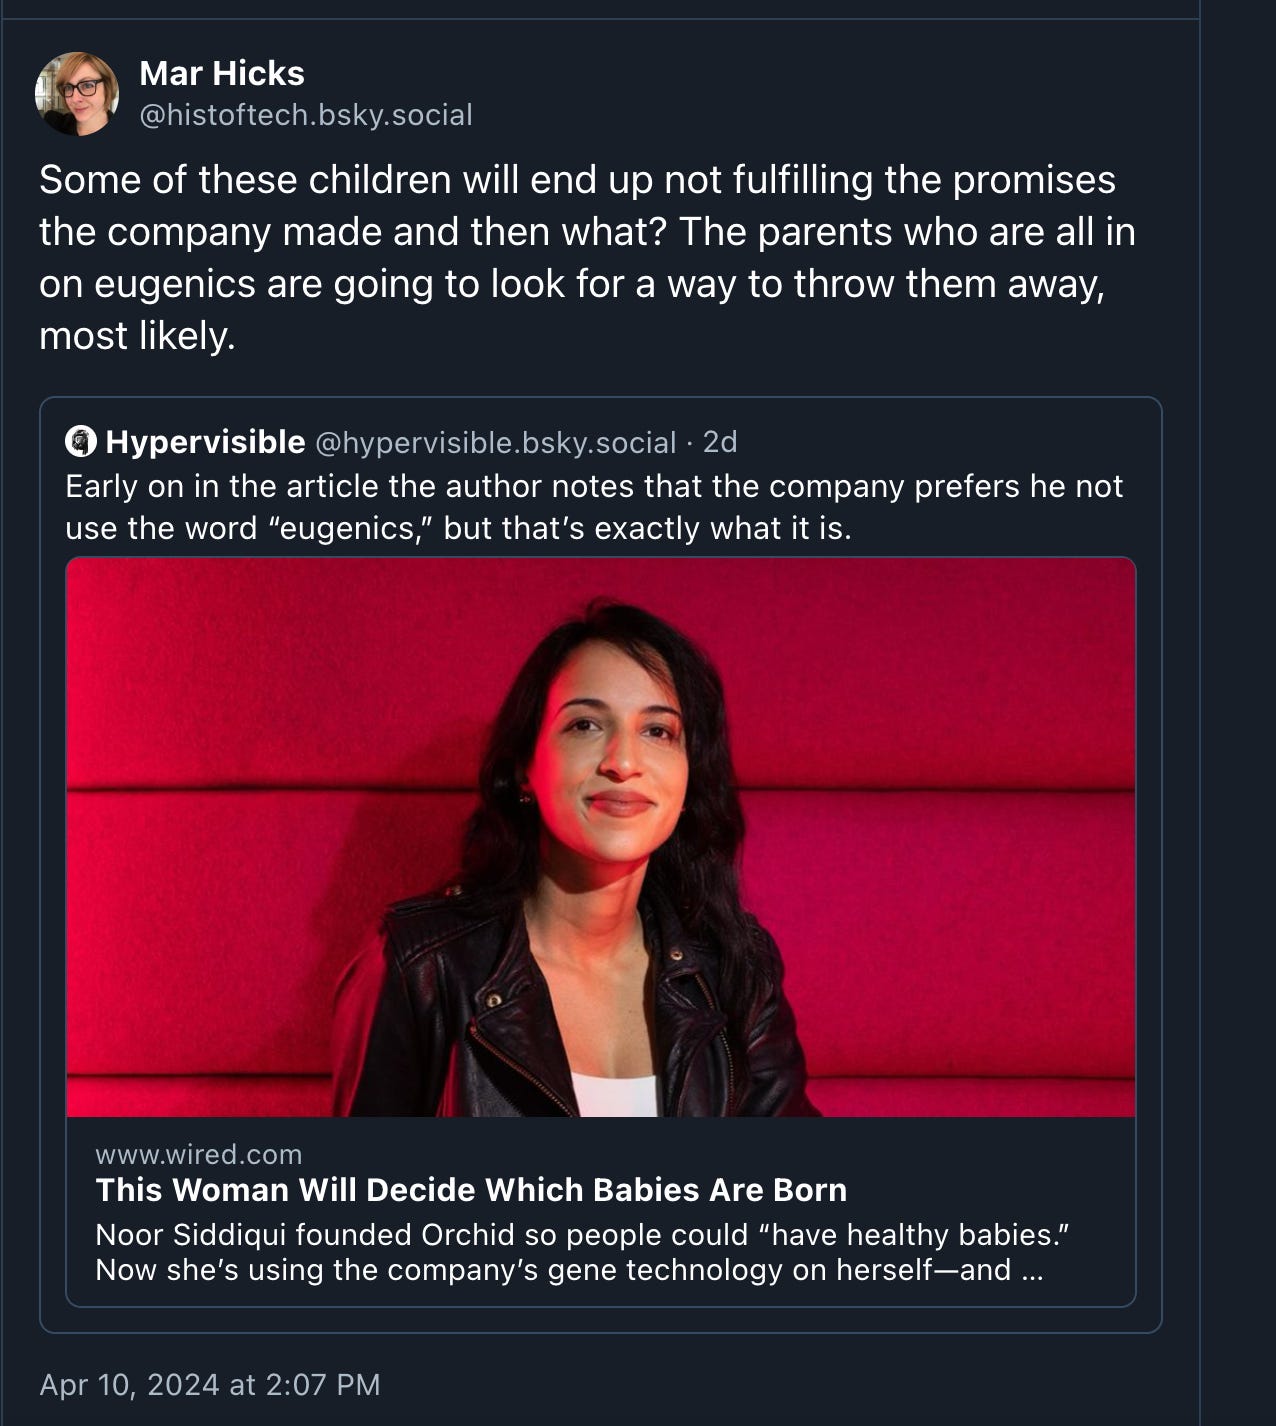 A quote tweet for an article called "This woman will decide what babies are born." The tweet says "Early on in the article the company prefers he not use the word 'eugenics', but that's exactly what it is." The quote tweet reads Some of these children will end up not fulfilling the promises the company made and then what? The parents who are all in on eugenics are going to look for a way to throw them away, most likely.